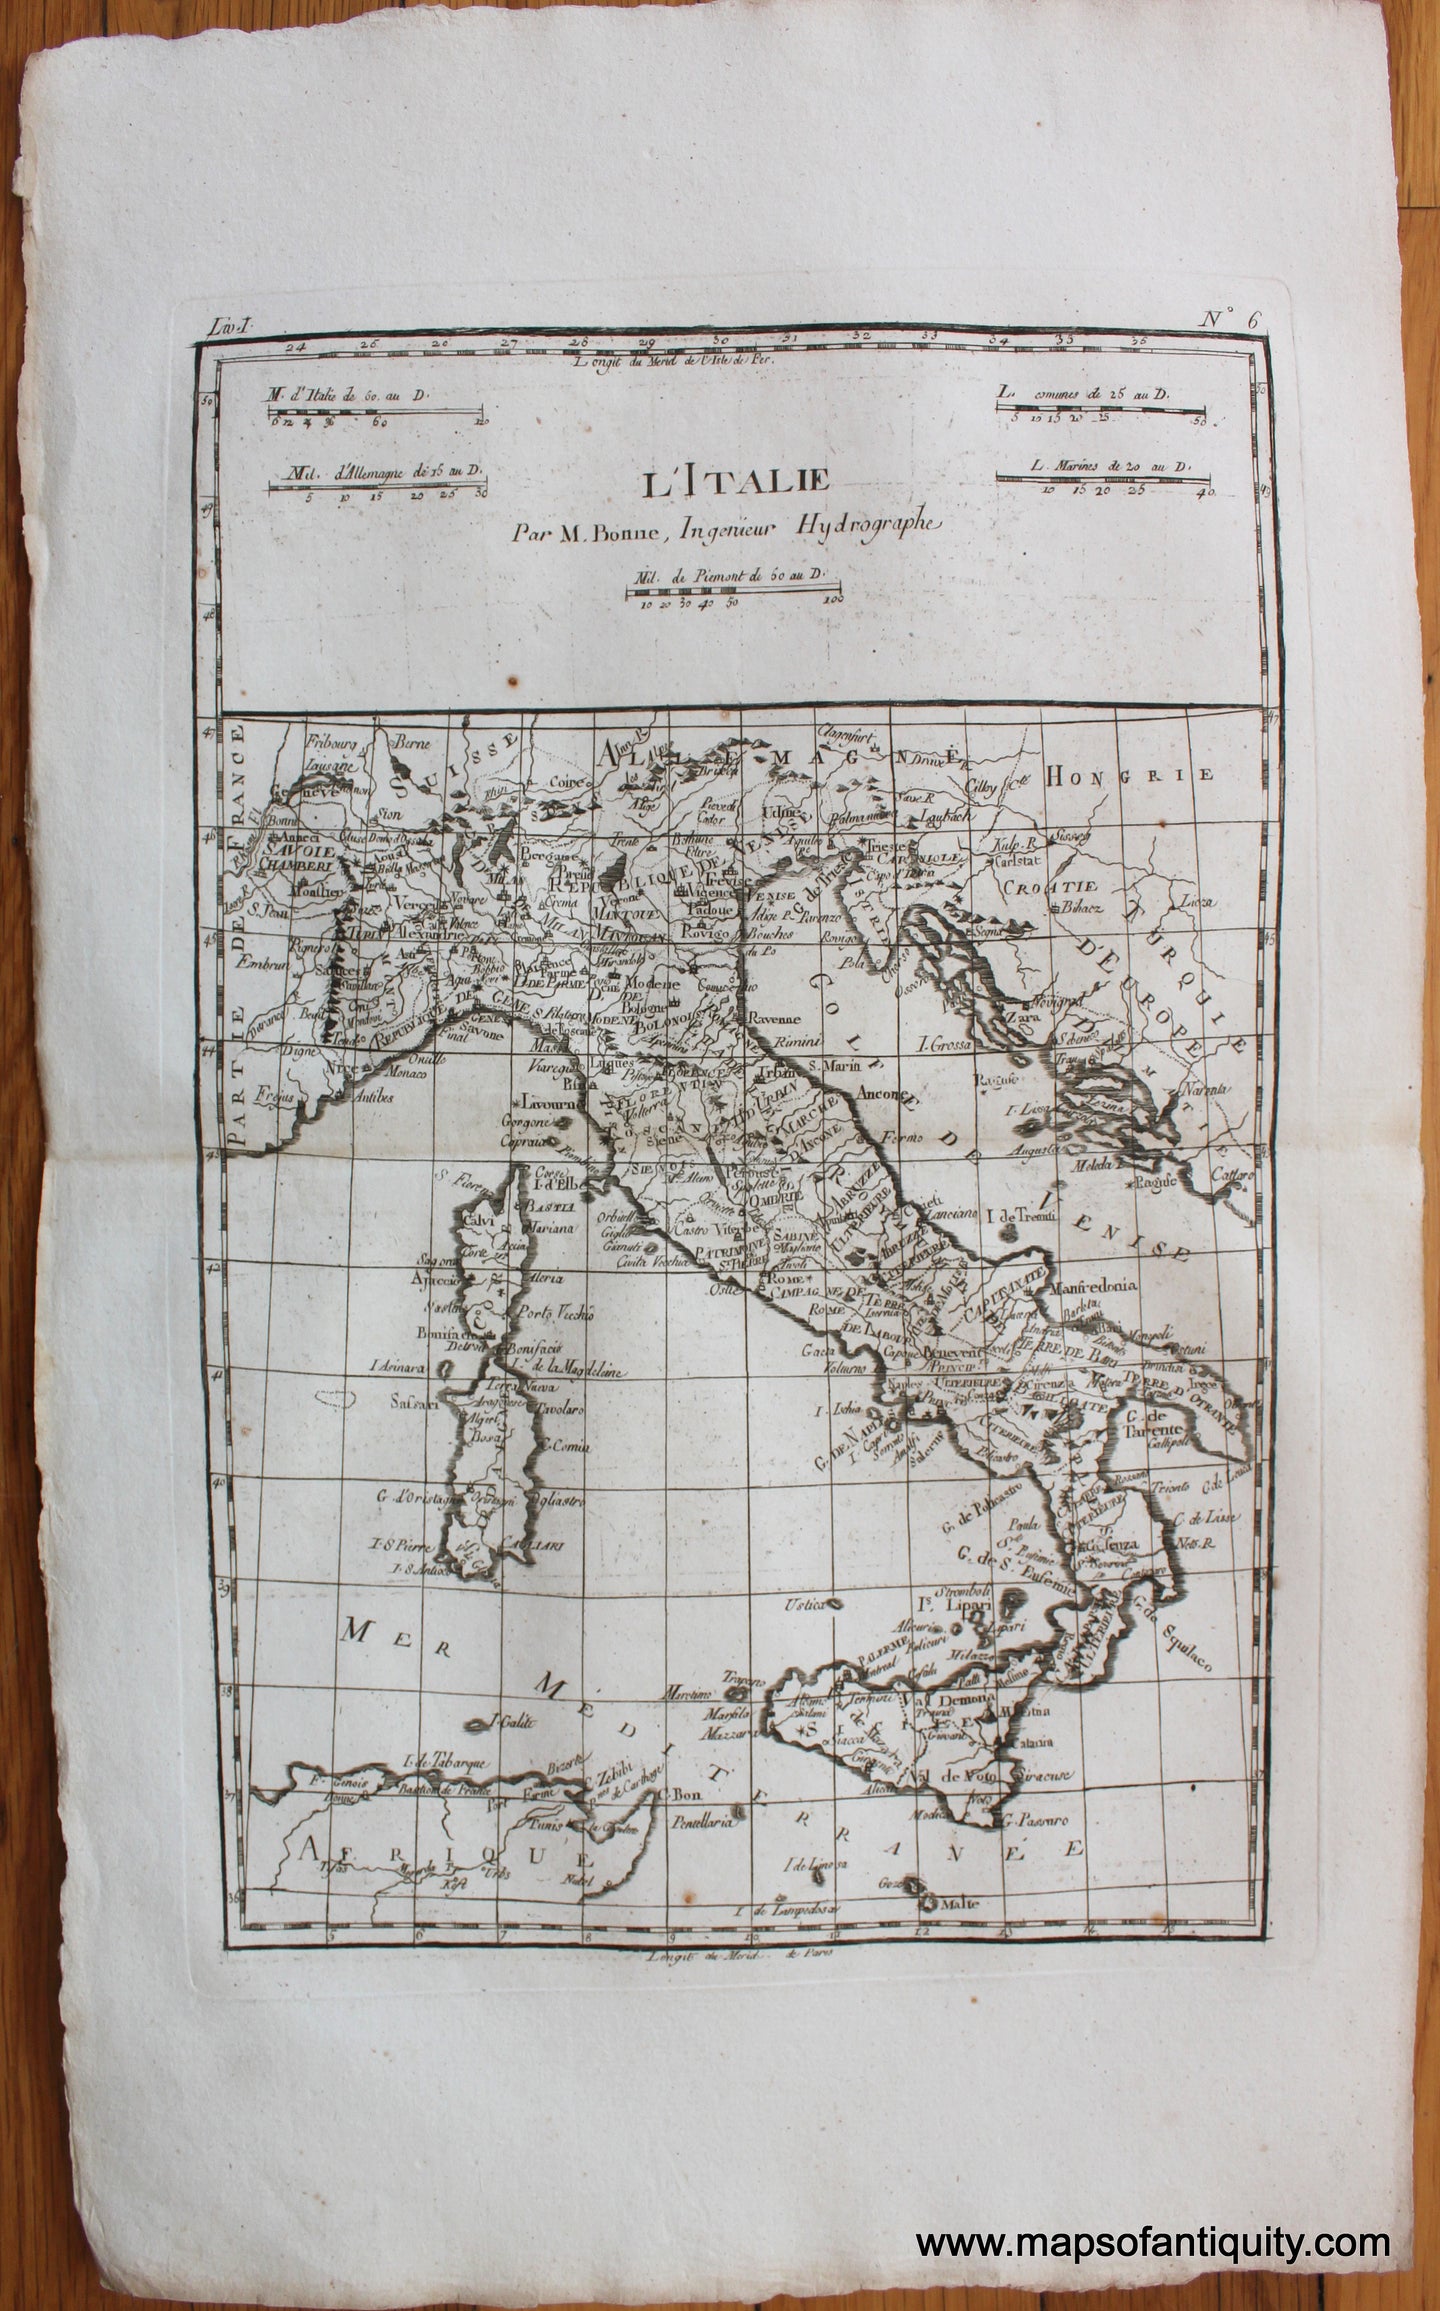 Black-and-White-Engraved-Antique-Map-1780-Raynal-and-Bonne-L'Italie-******-Italy